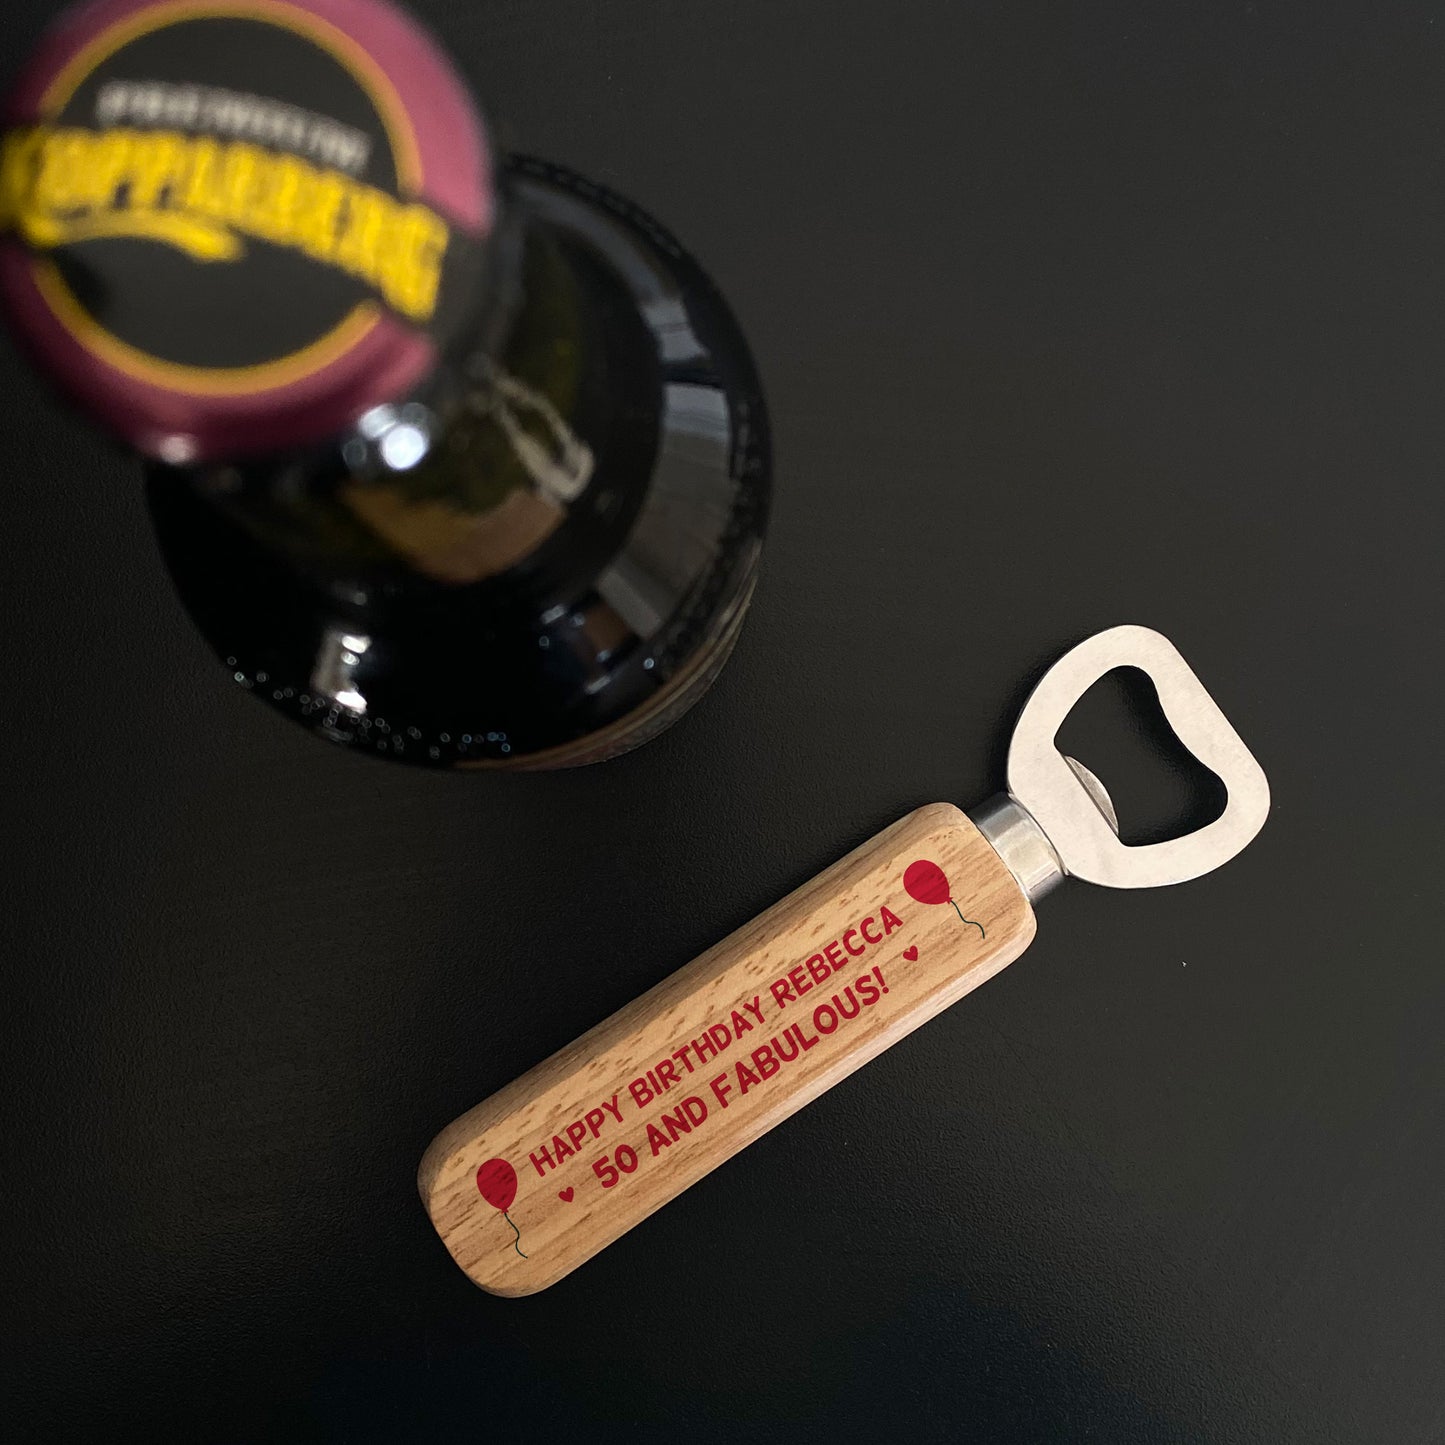 50th Birthday Gift 50 and Fabulous Wooden Bottle Opener